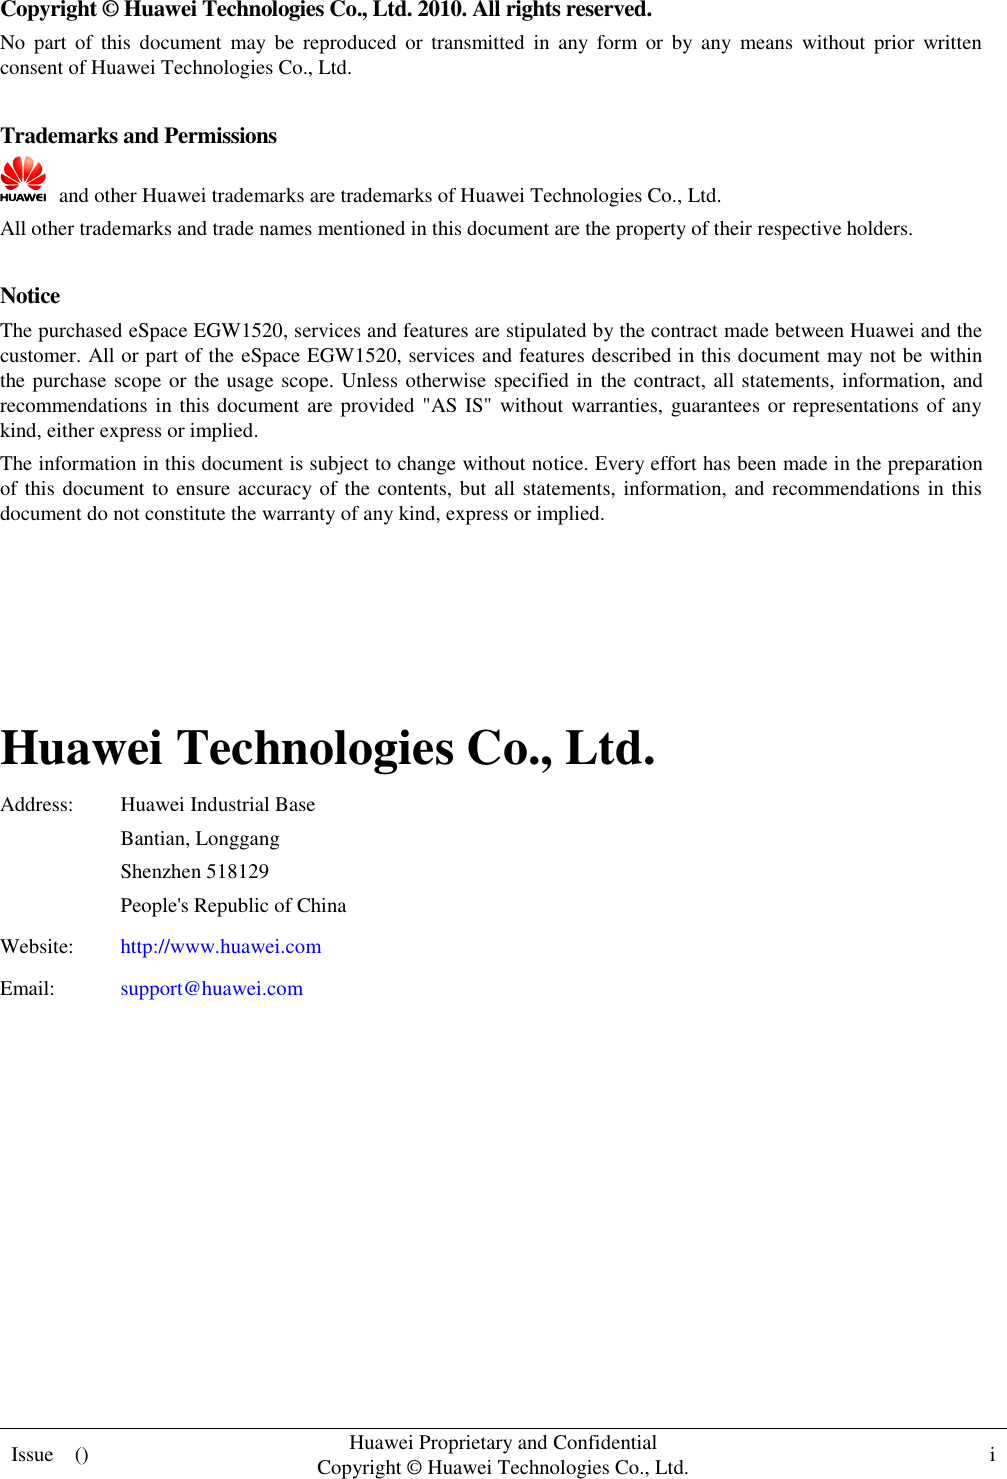  Issue    () Huawei Proprietary and Confidential                                     Copyright © Huawei Technologies Co., Ltd. i    Copyright © Huawei Technologies Co., Ltd. 2010. All rights reserved. No  part  of  this  document  may  be  reproduced  or  transmitted  in  any  form  or  by  any  means  without  prior  written consent of Huawei Technologies Co., Ltd.  Trademarks and Permissions   and other Huawei trademarks are trademarks of Huawei Technologies Co., Ltd. All other trademarks and trade names mentioned in this document are the property of their respective holders.  Notice The purchased eSpace EGW1520, services and features are stipulated by the contract made between Huawei and the customer. All or part of the eSpace EGW1520, services and features described in this document may not be within the purchase scope or the usage scope. Unless otherwise specified in the contract, all statements, information, and recommendations in this document are provided &quot;AS IS&quot; without warranties, guarantees or representations of any kind, either express or implied. The information in this document is subject to change without notice. Every effort has been made in the preparation of this document to ensure accuracy of the contents, but all statements, information, and recommendations in this document do not constitute the warranty of any kind, express or implied.     Huawei Technologies Co., Ltd. Address: Huawei Industrial Base Bantian, Longgang Shenzhen 518129 People&apos;s Republic of China Website: http://www.huawei.com Email: support@huawei.com          